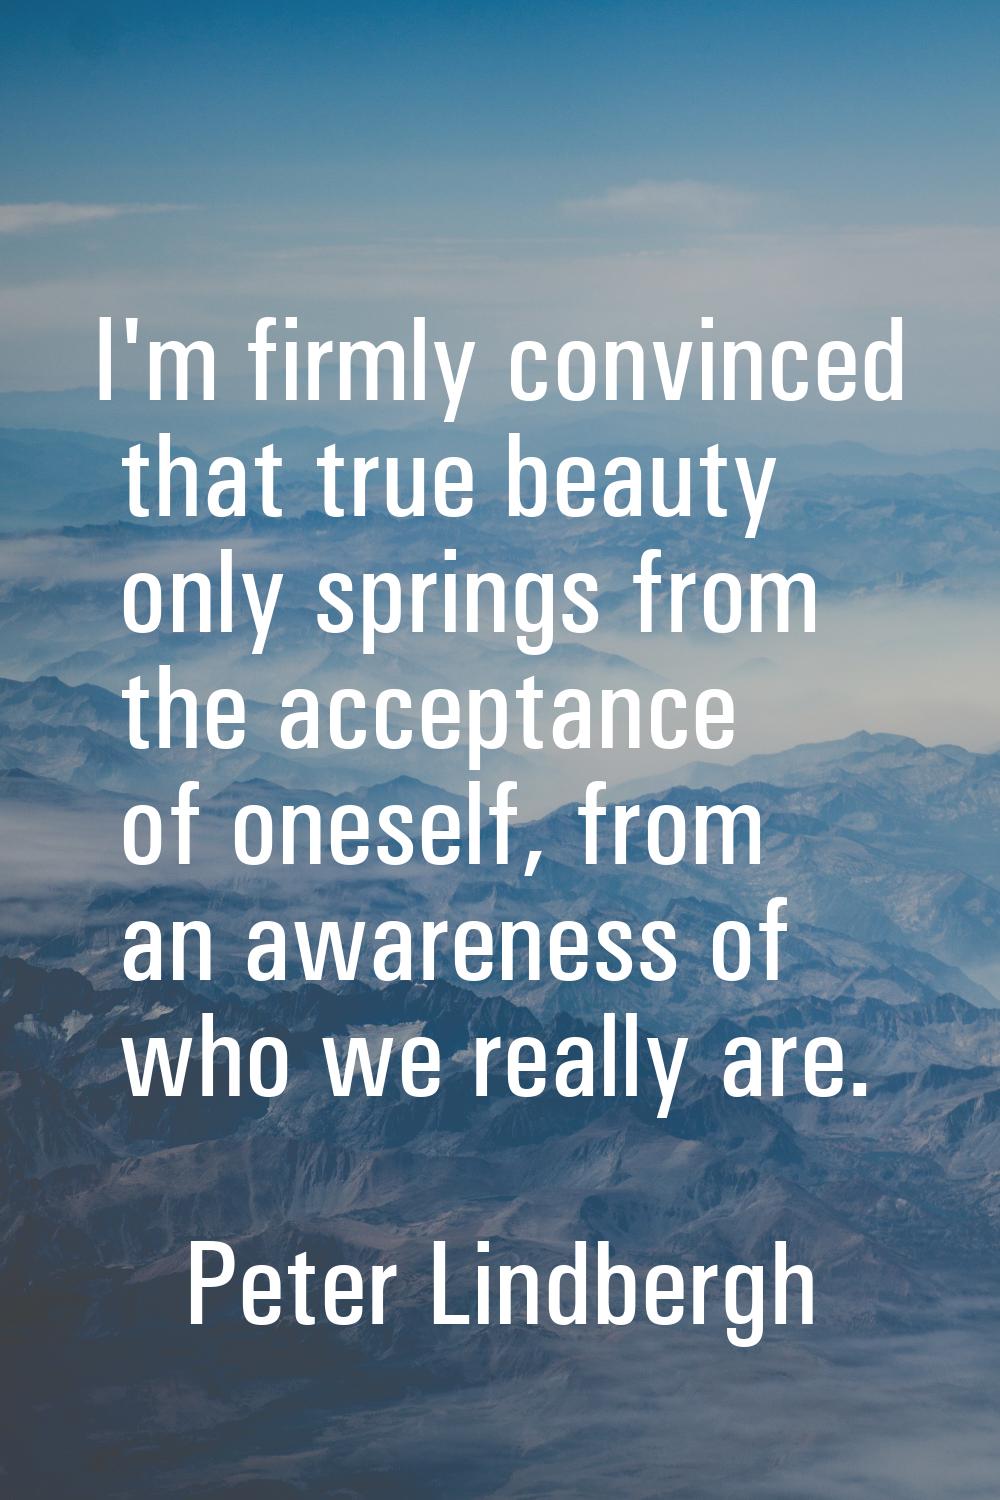 I'm firmly convinced that true beauty only springs from the acceptance of oneself, from an awarenes